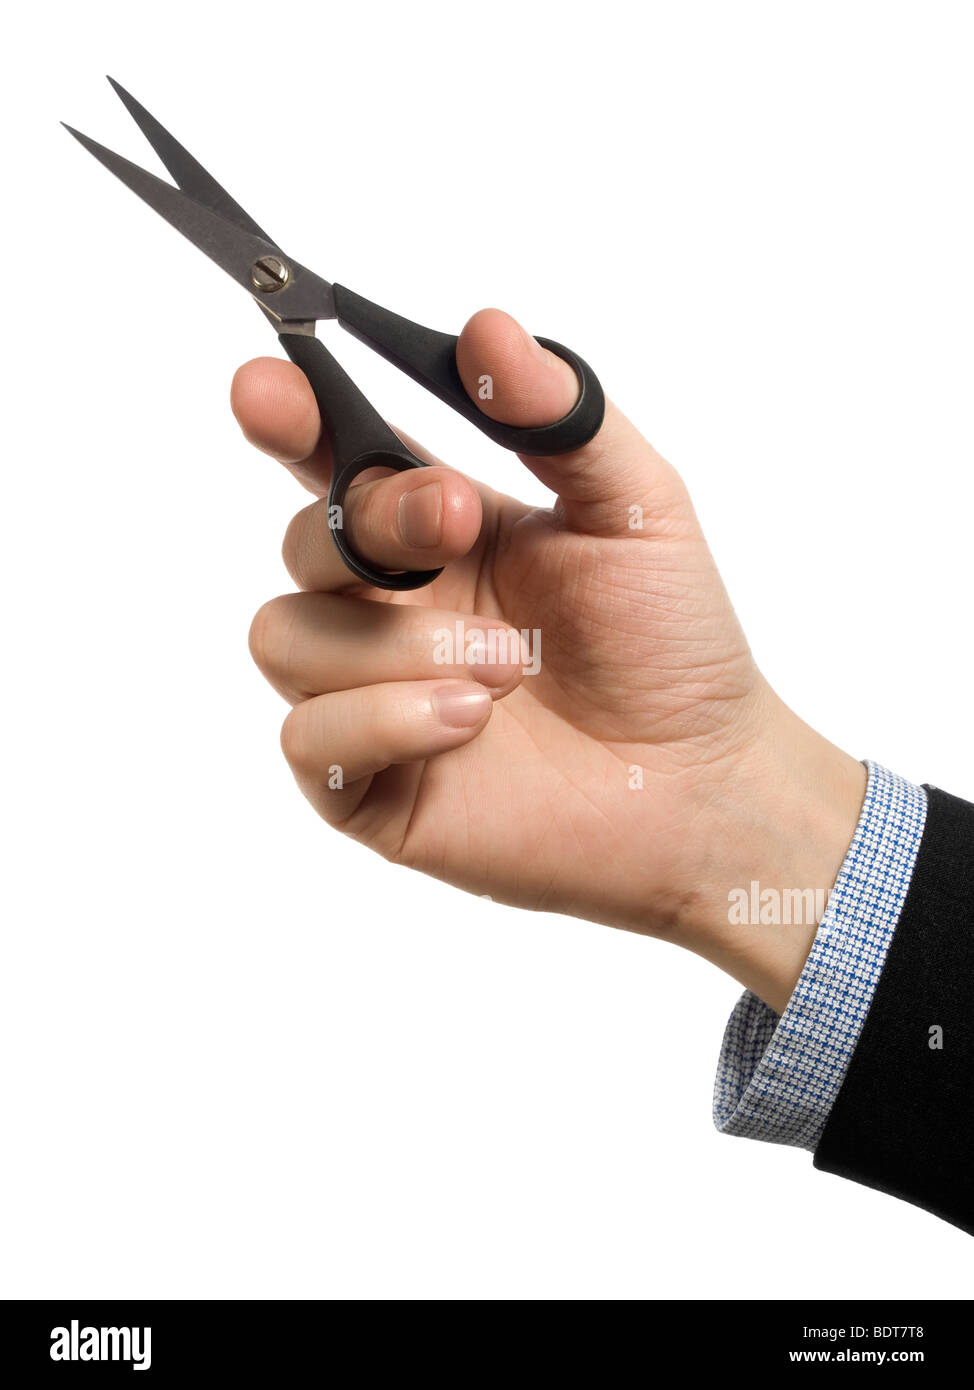 A man's hand holding a pair of scissors over a white background. Stock Photo